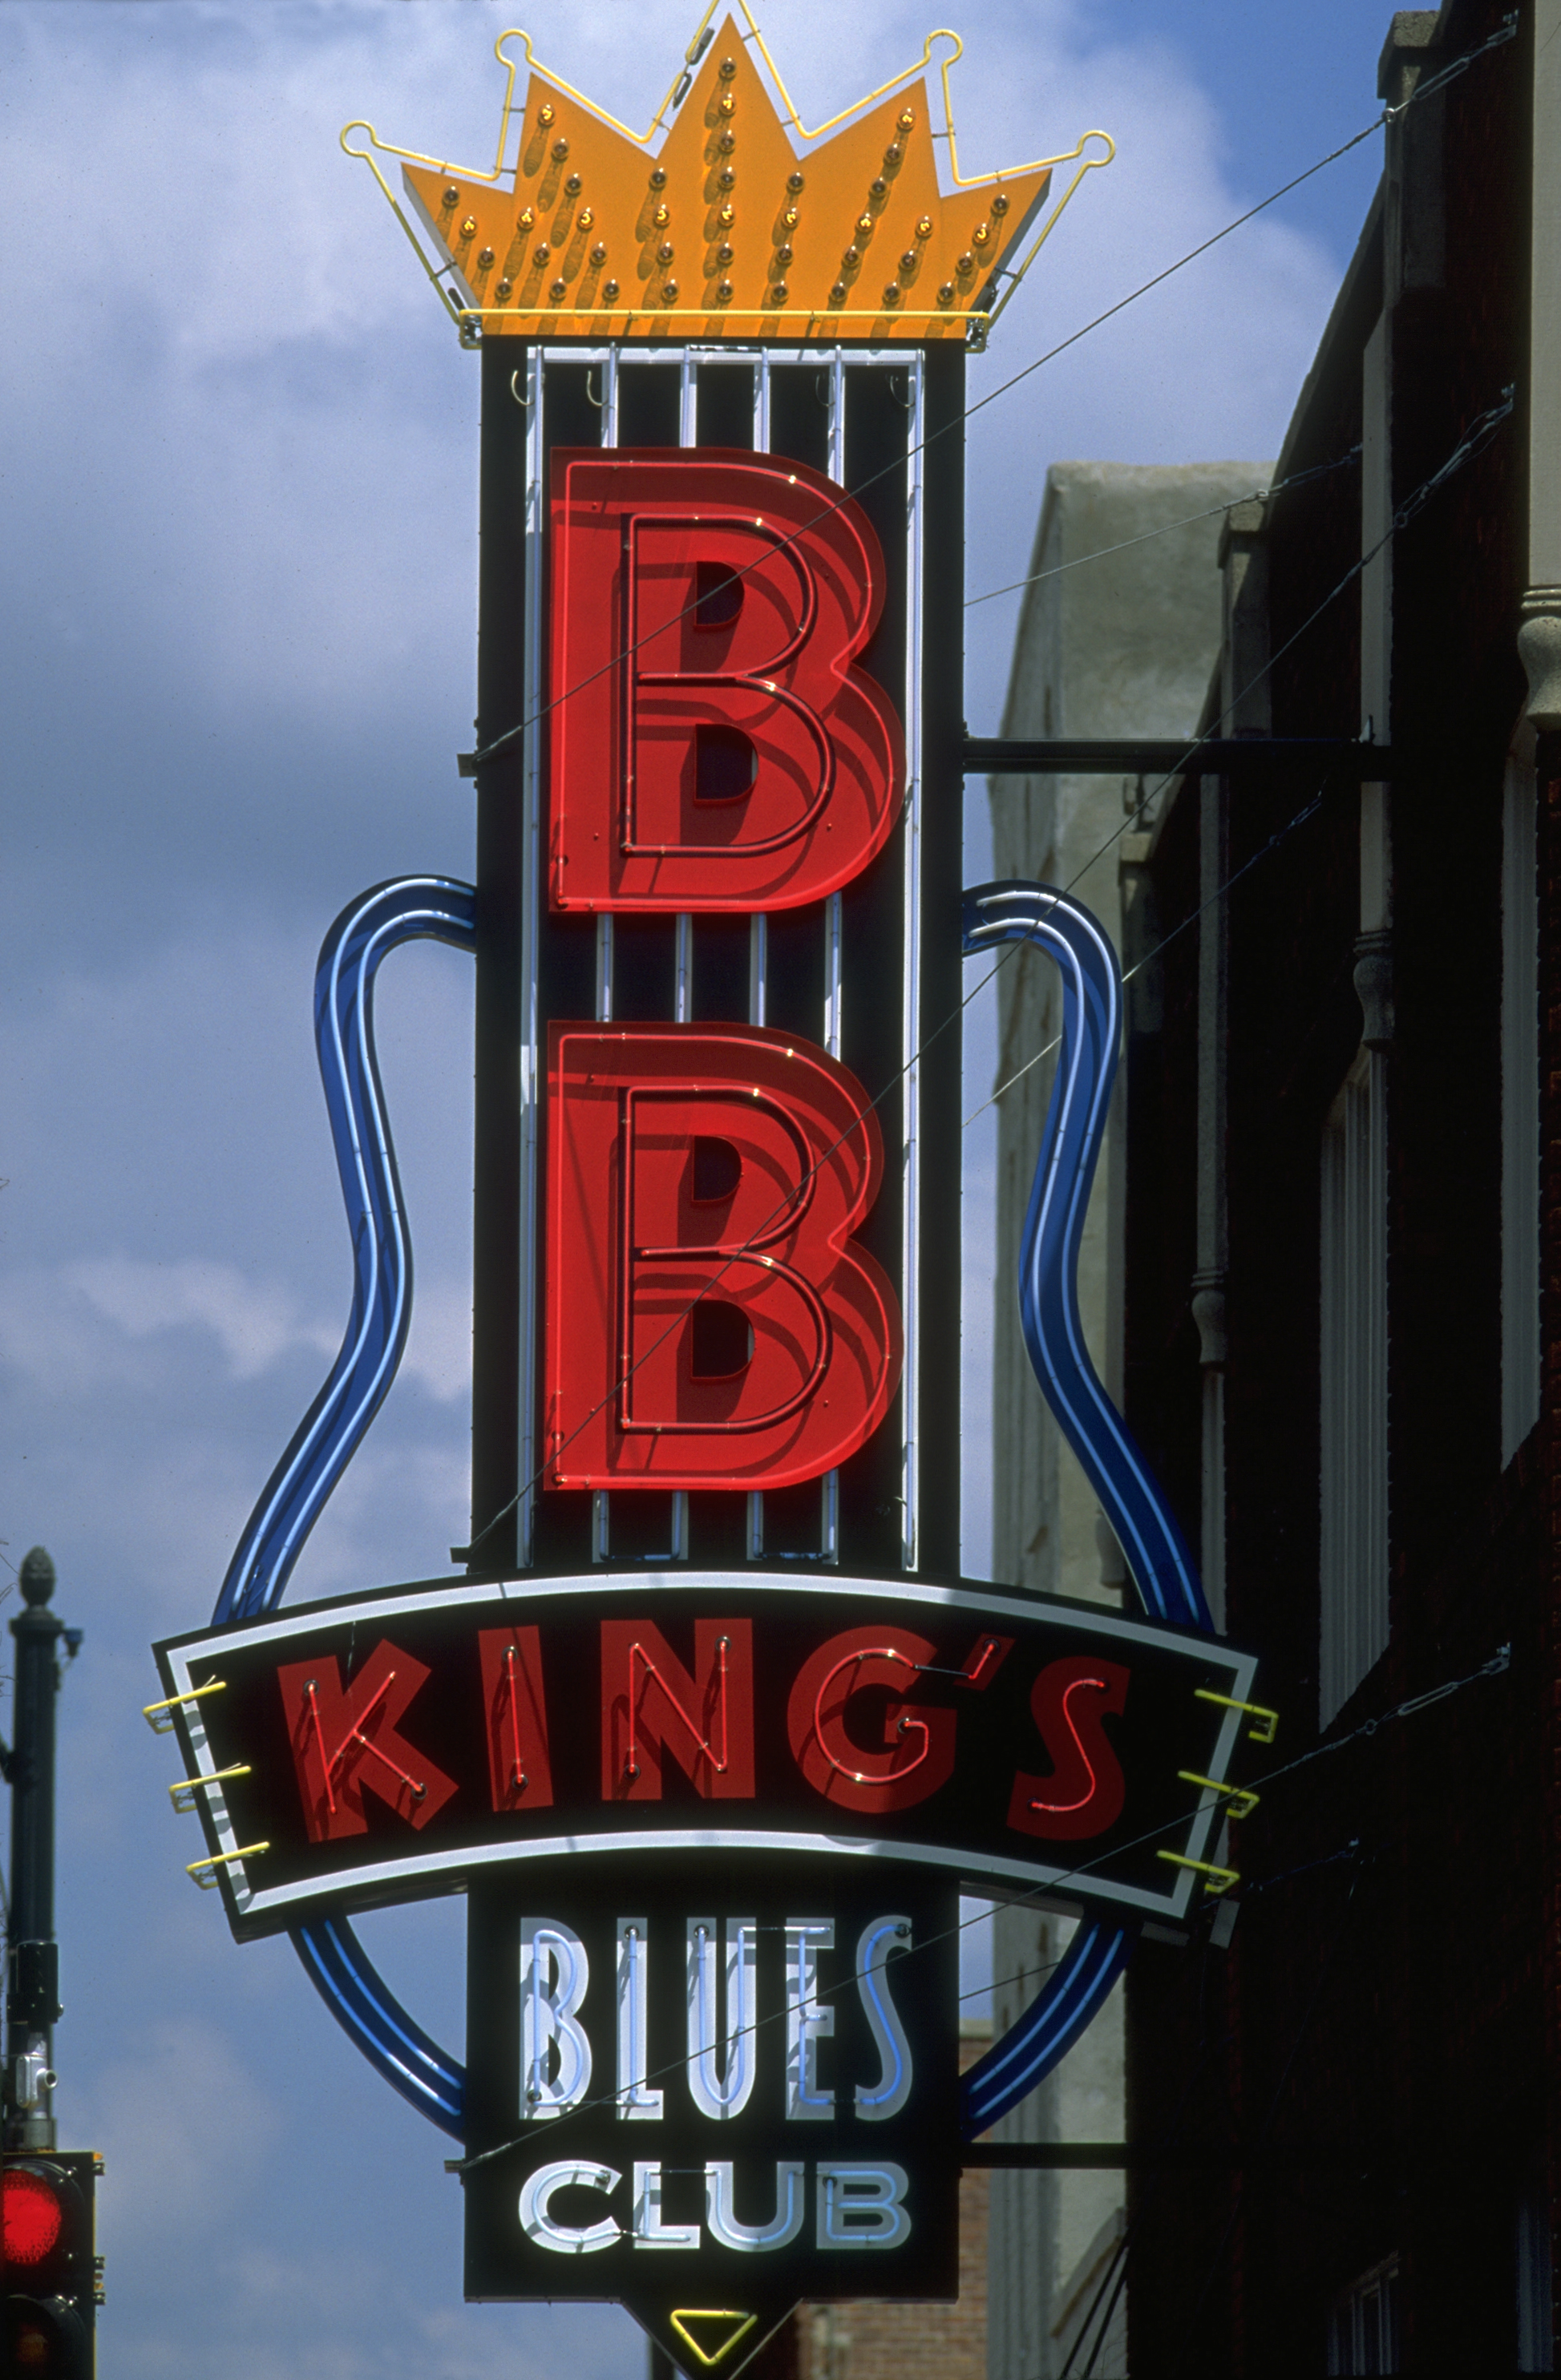  BB King’s Blues Club exterior signage as seen on Bluff City Law  Branding creative and design by Chuck Mitchell  Beale Street Memphis, TN 